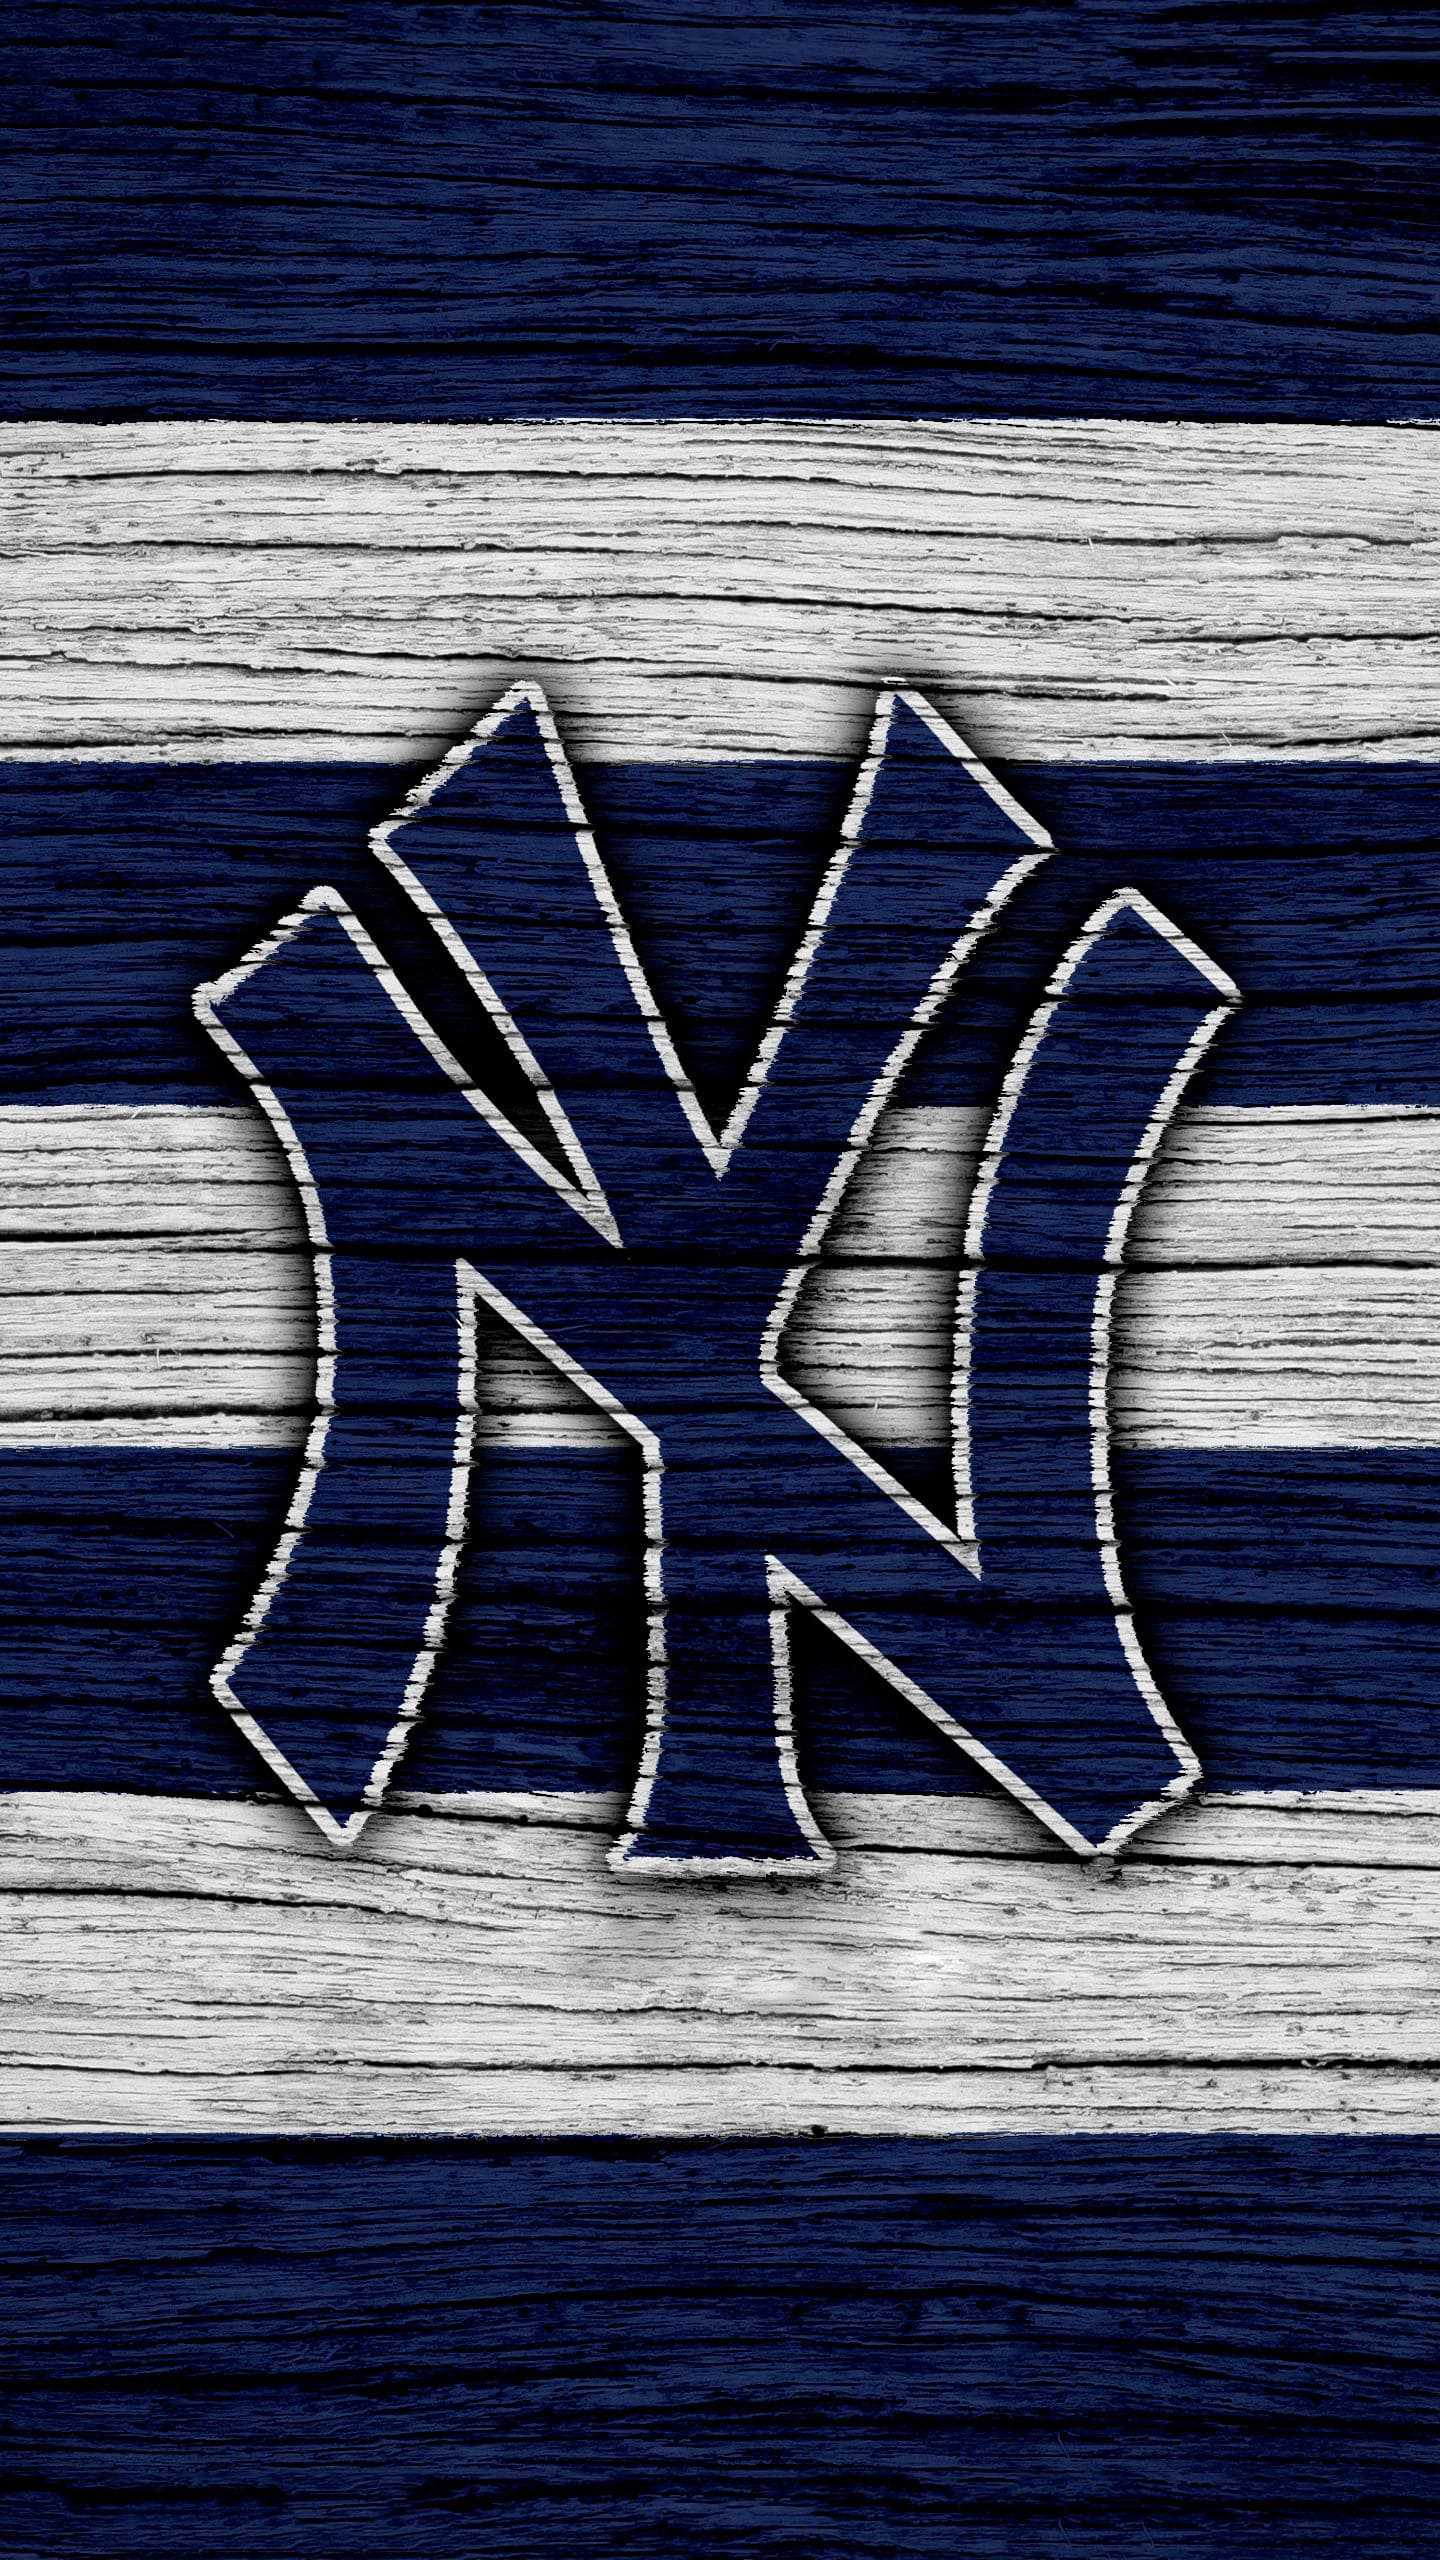 New York Yankees Backgrounds - Wallpaper Cave